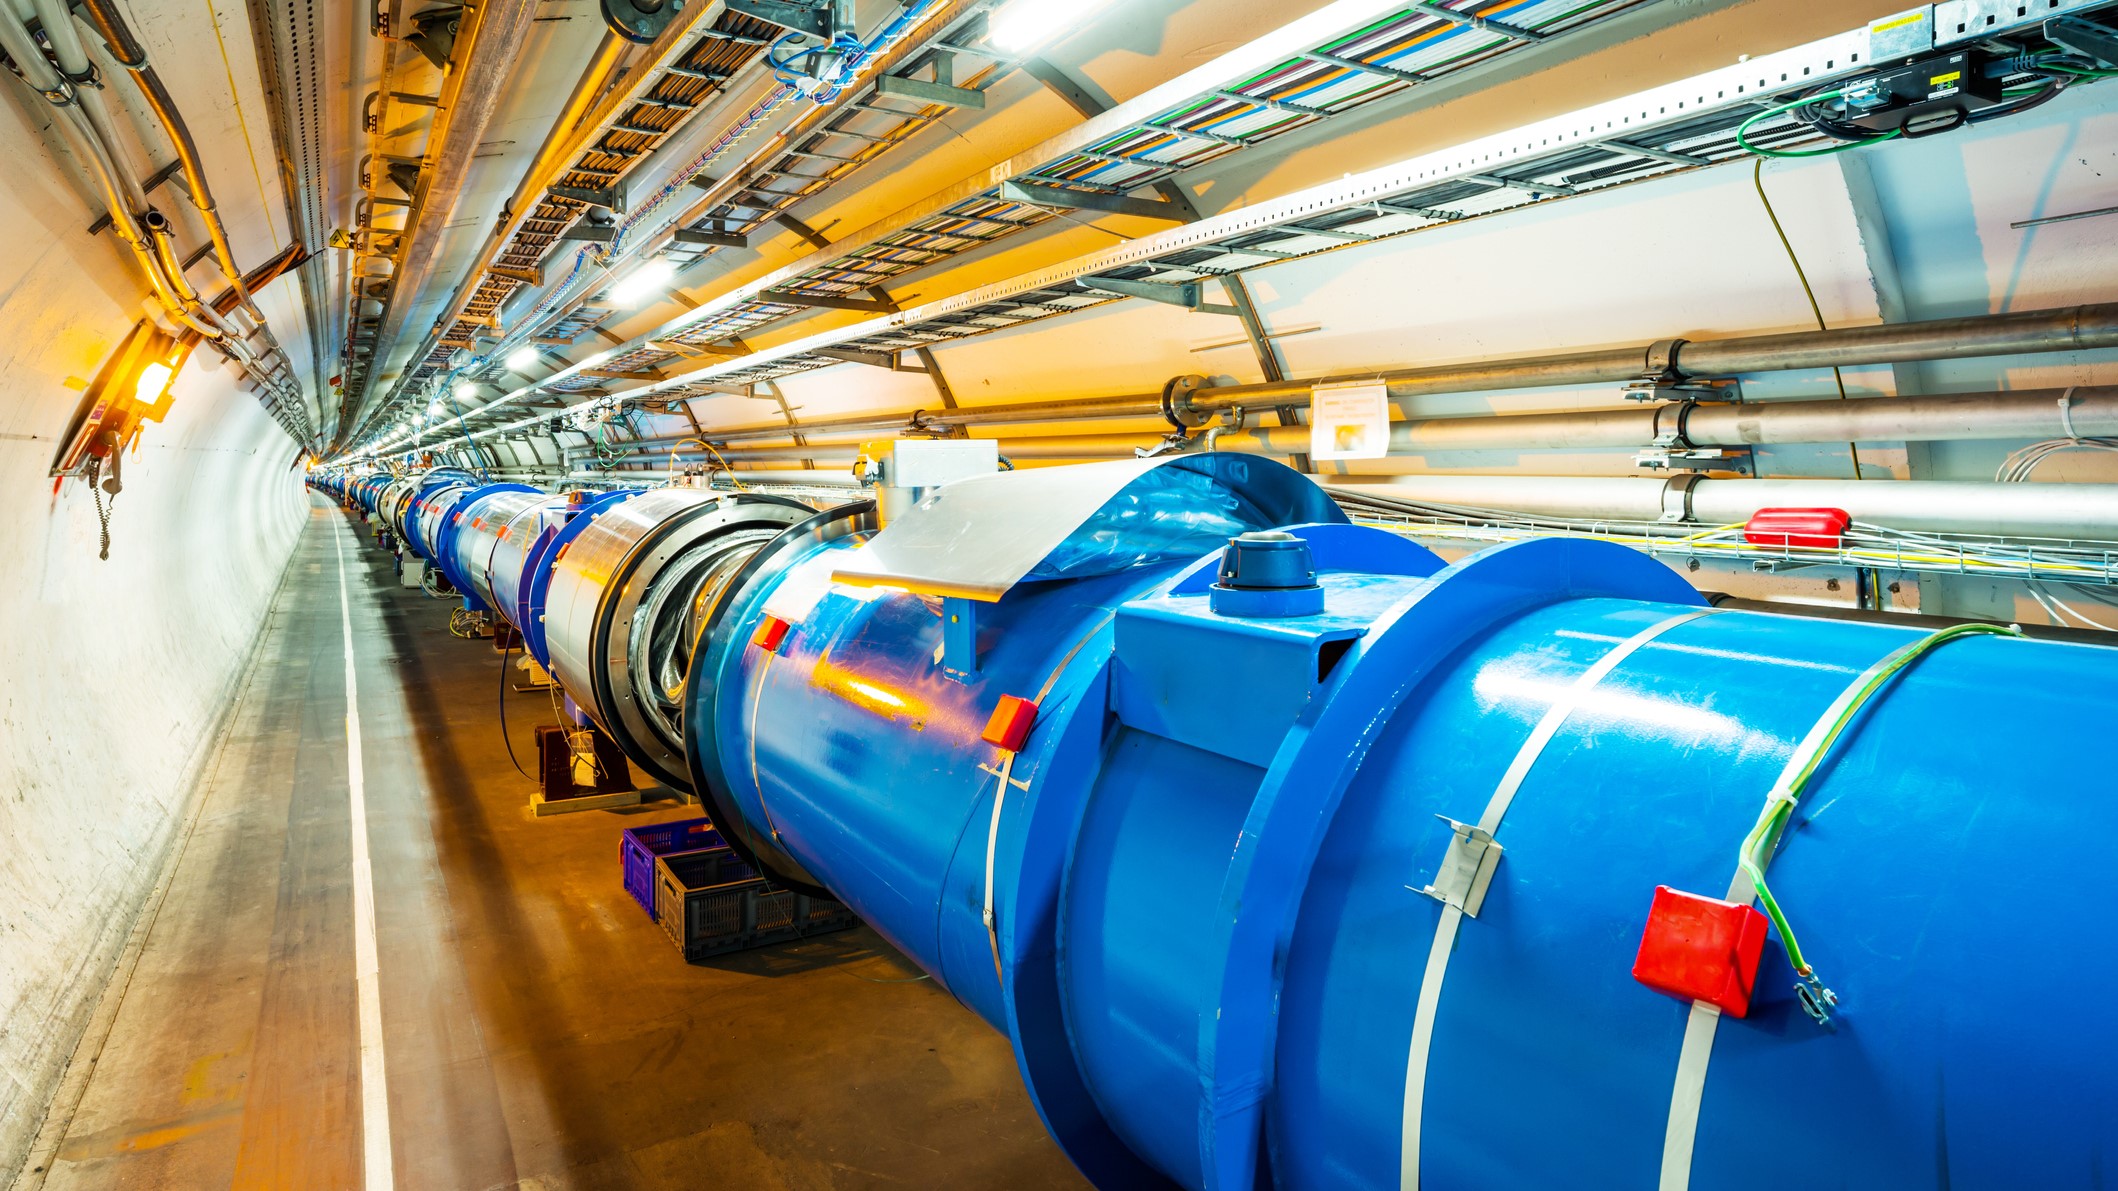 Photograph of a long tunnel containing the Large Hadron Collider.